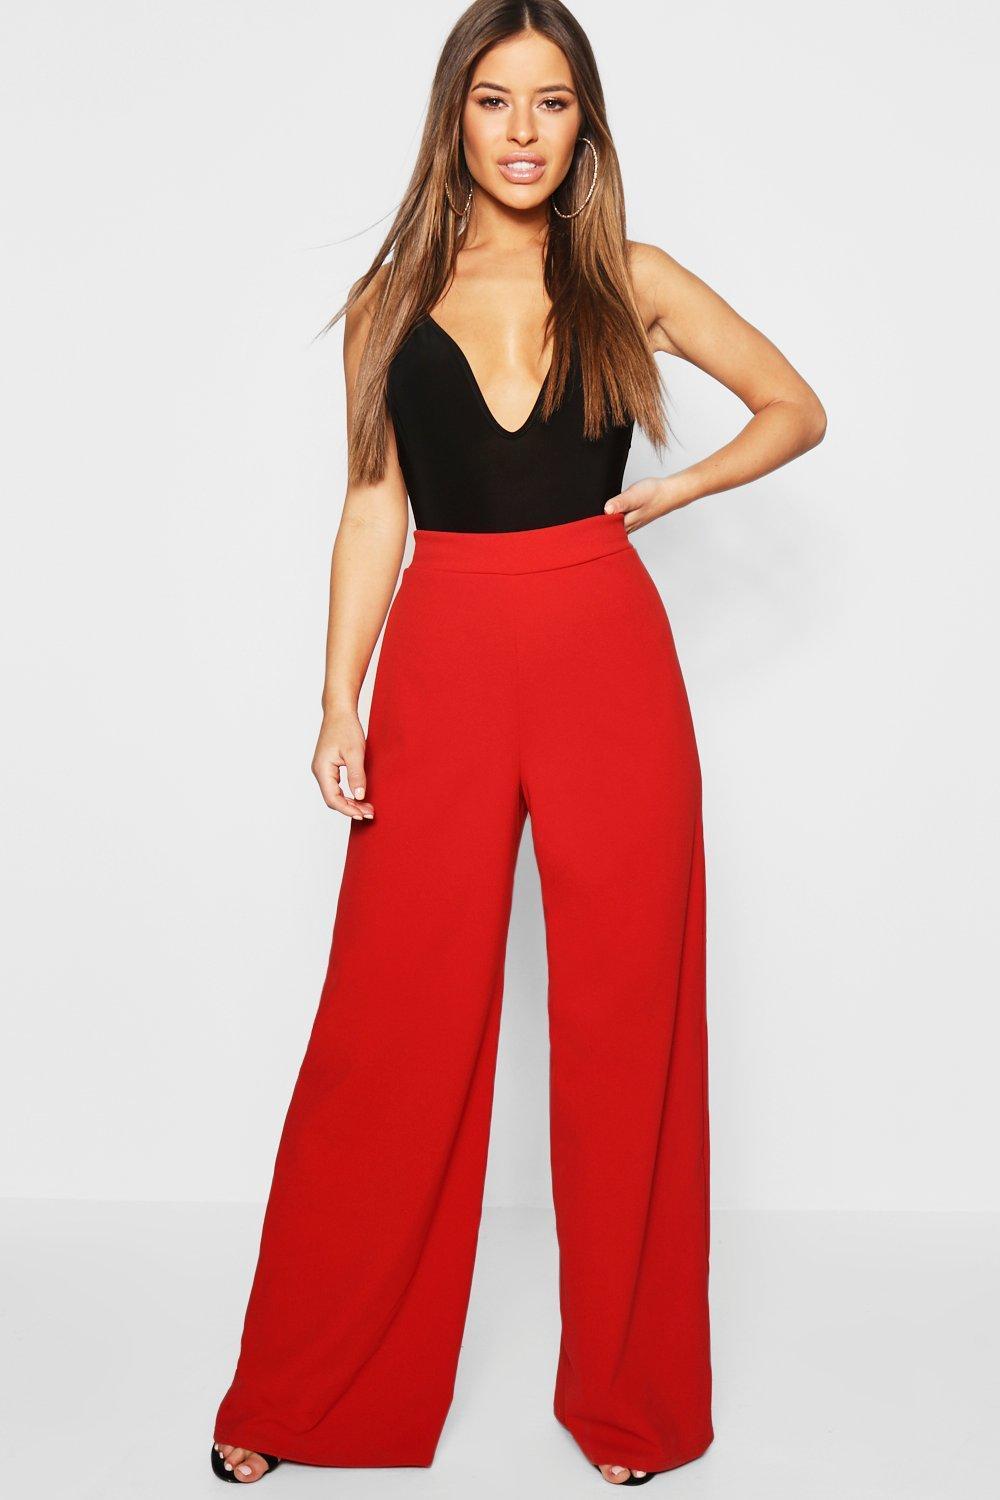 Boohoo Petite High Waisted Wide Leg Pants in Red - Lyst